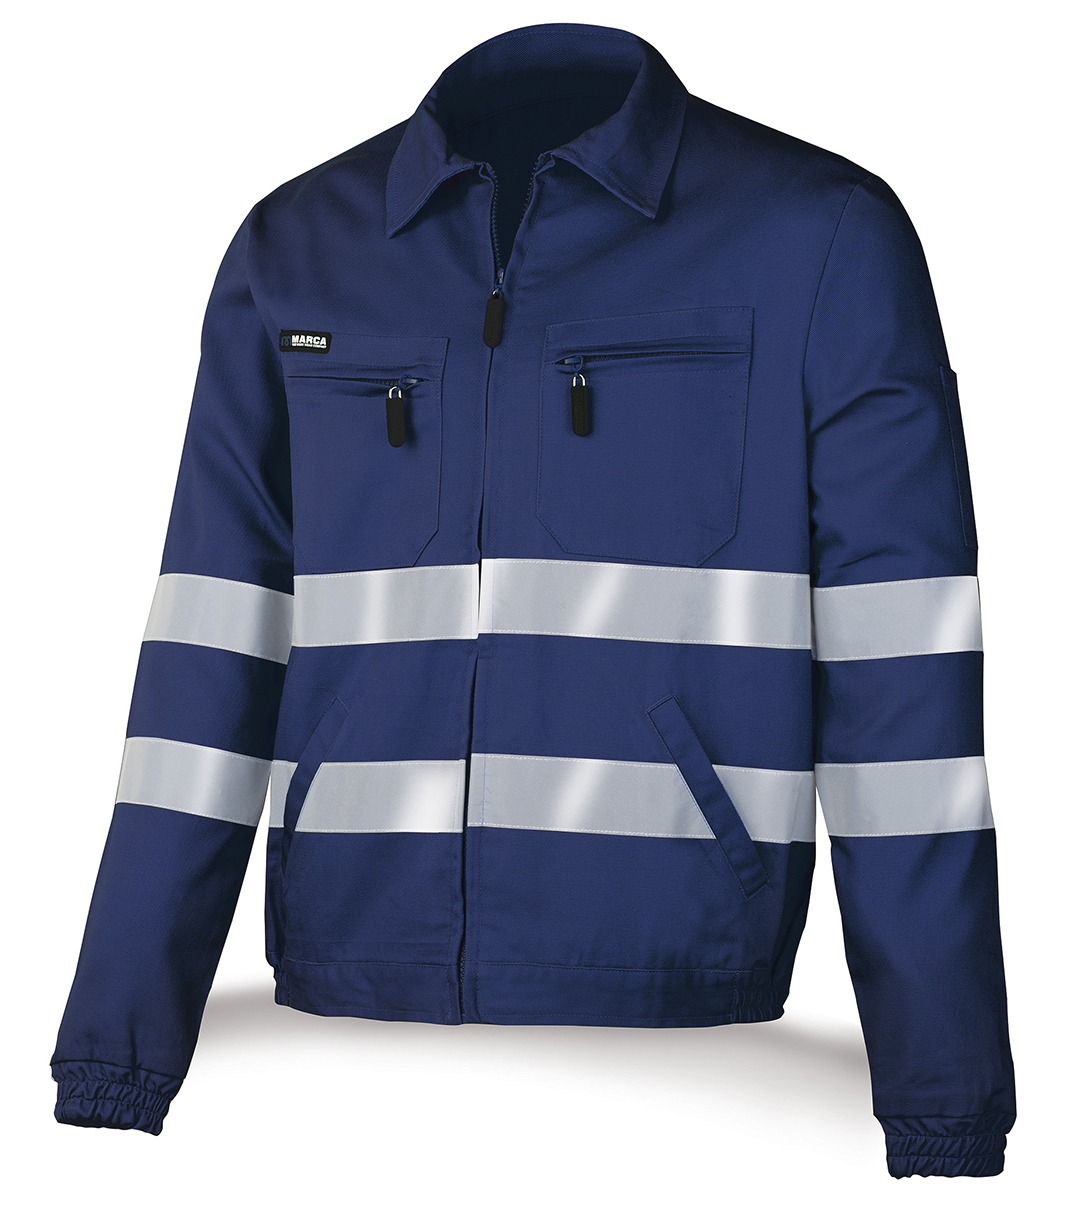 488-CACR Top Workwear Top Series Navy blue cotton jacket with reflective stripes 245 g.